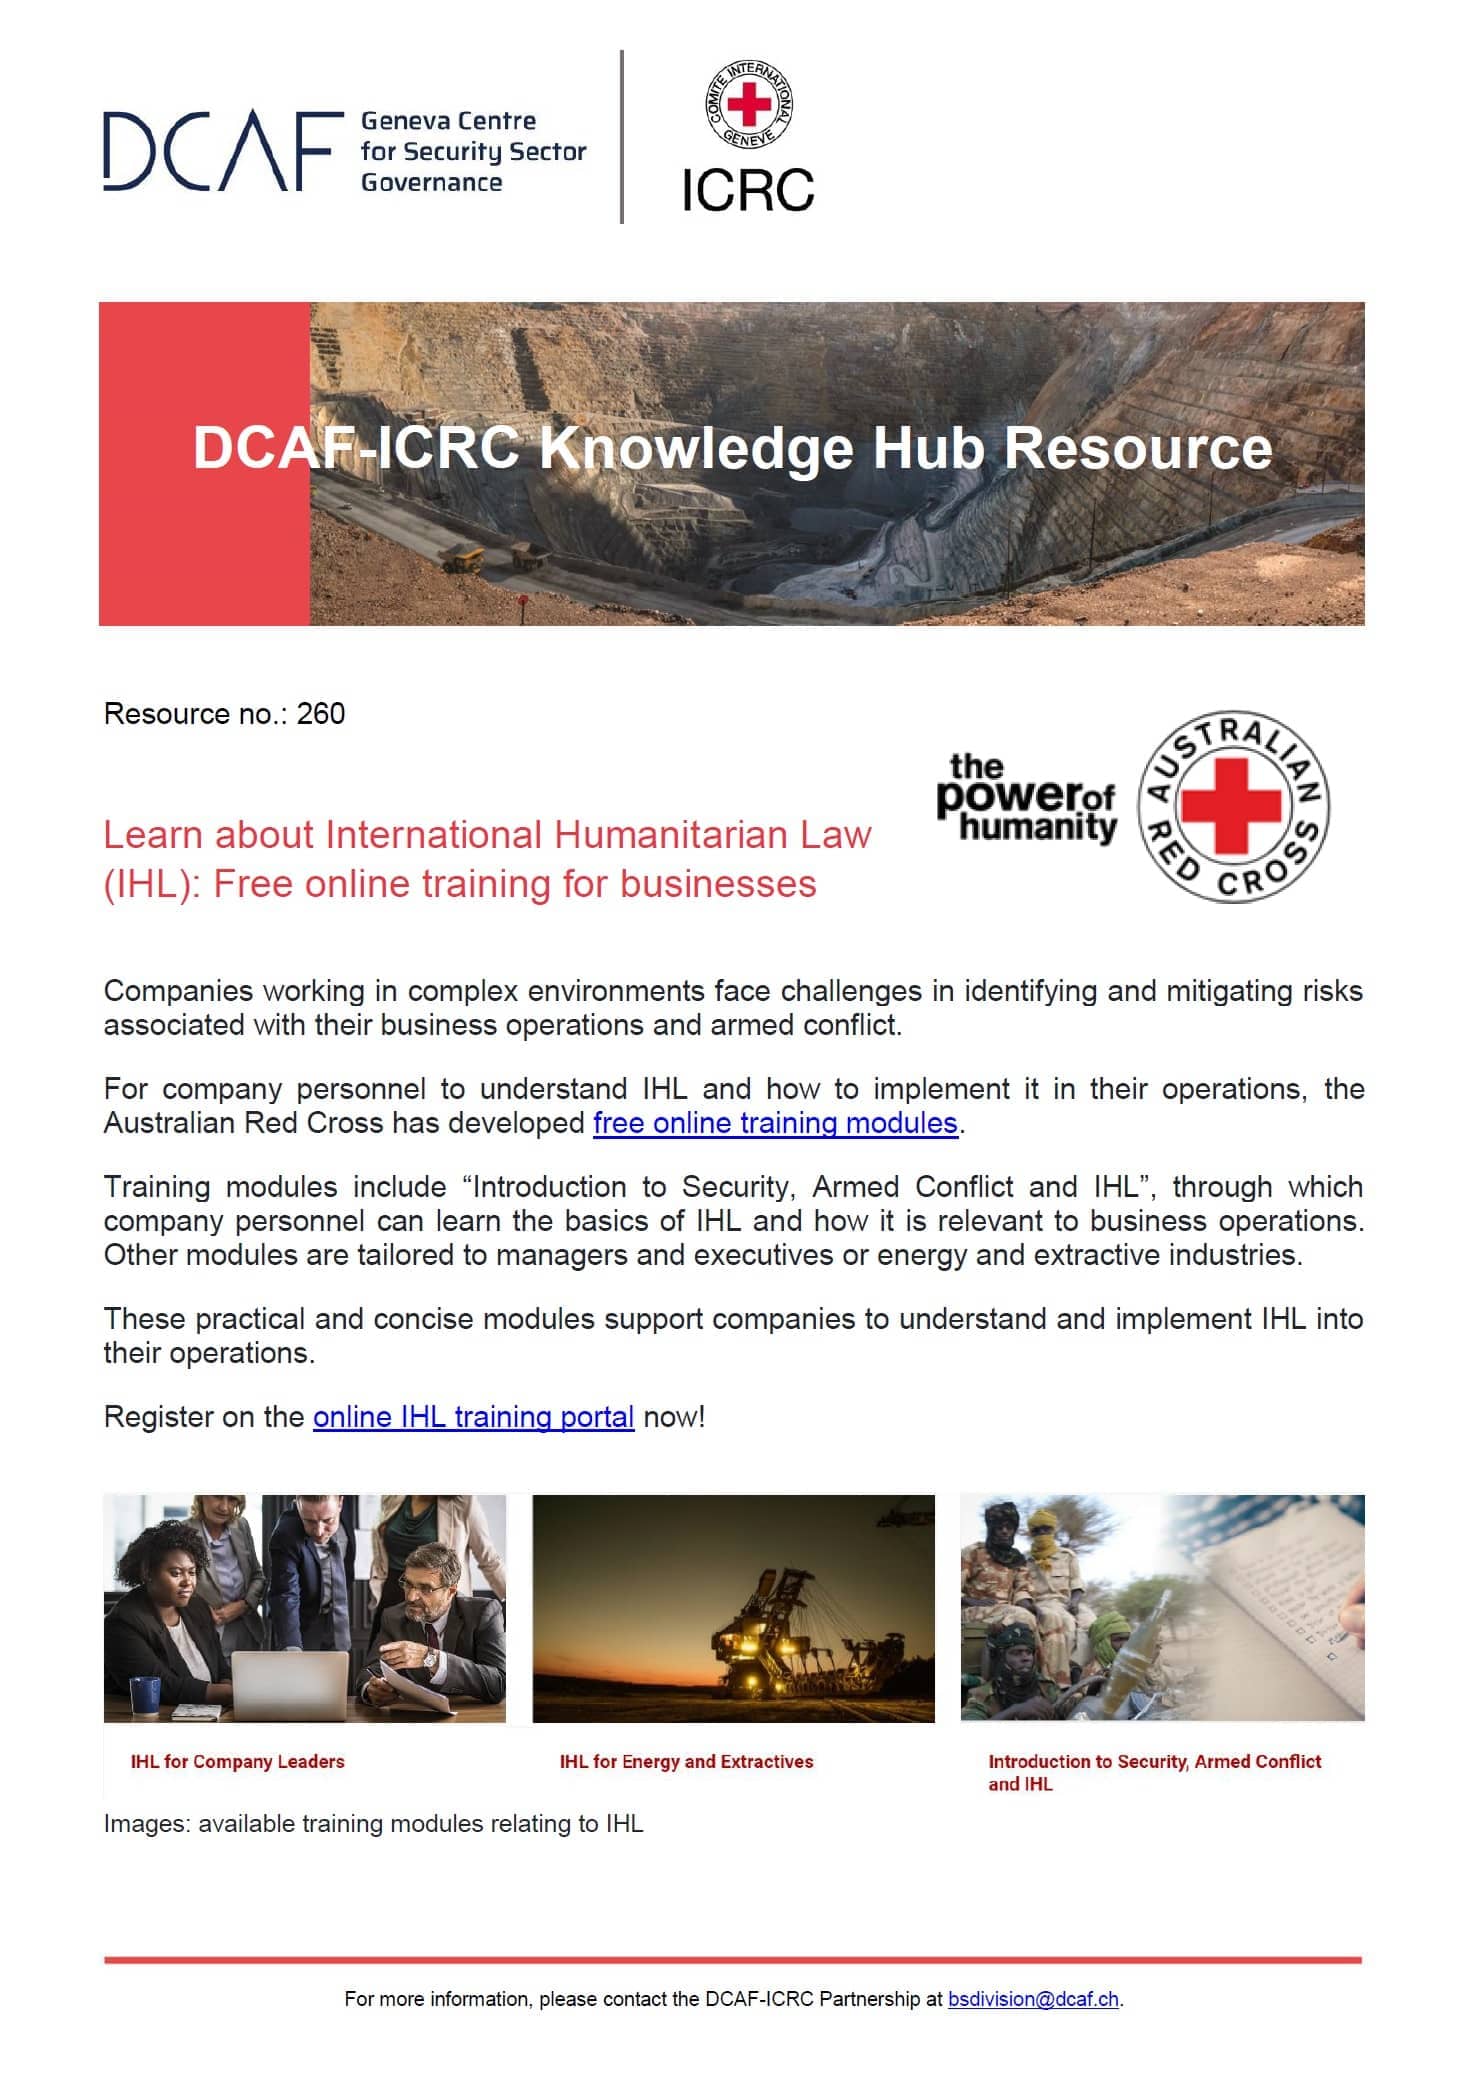 Learn about International Humanitarian Law (IHL): Free online training for businesses (Australian Red Cross)